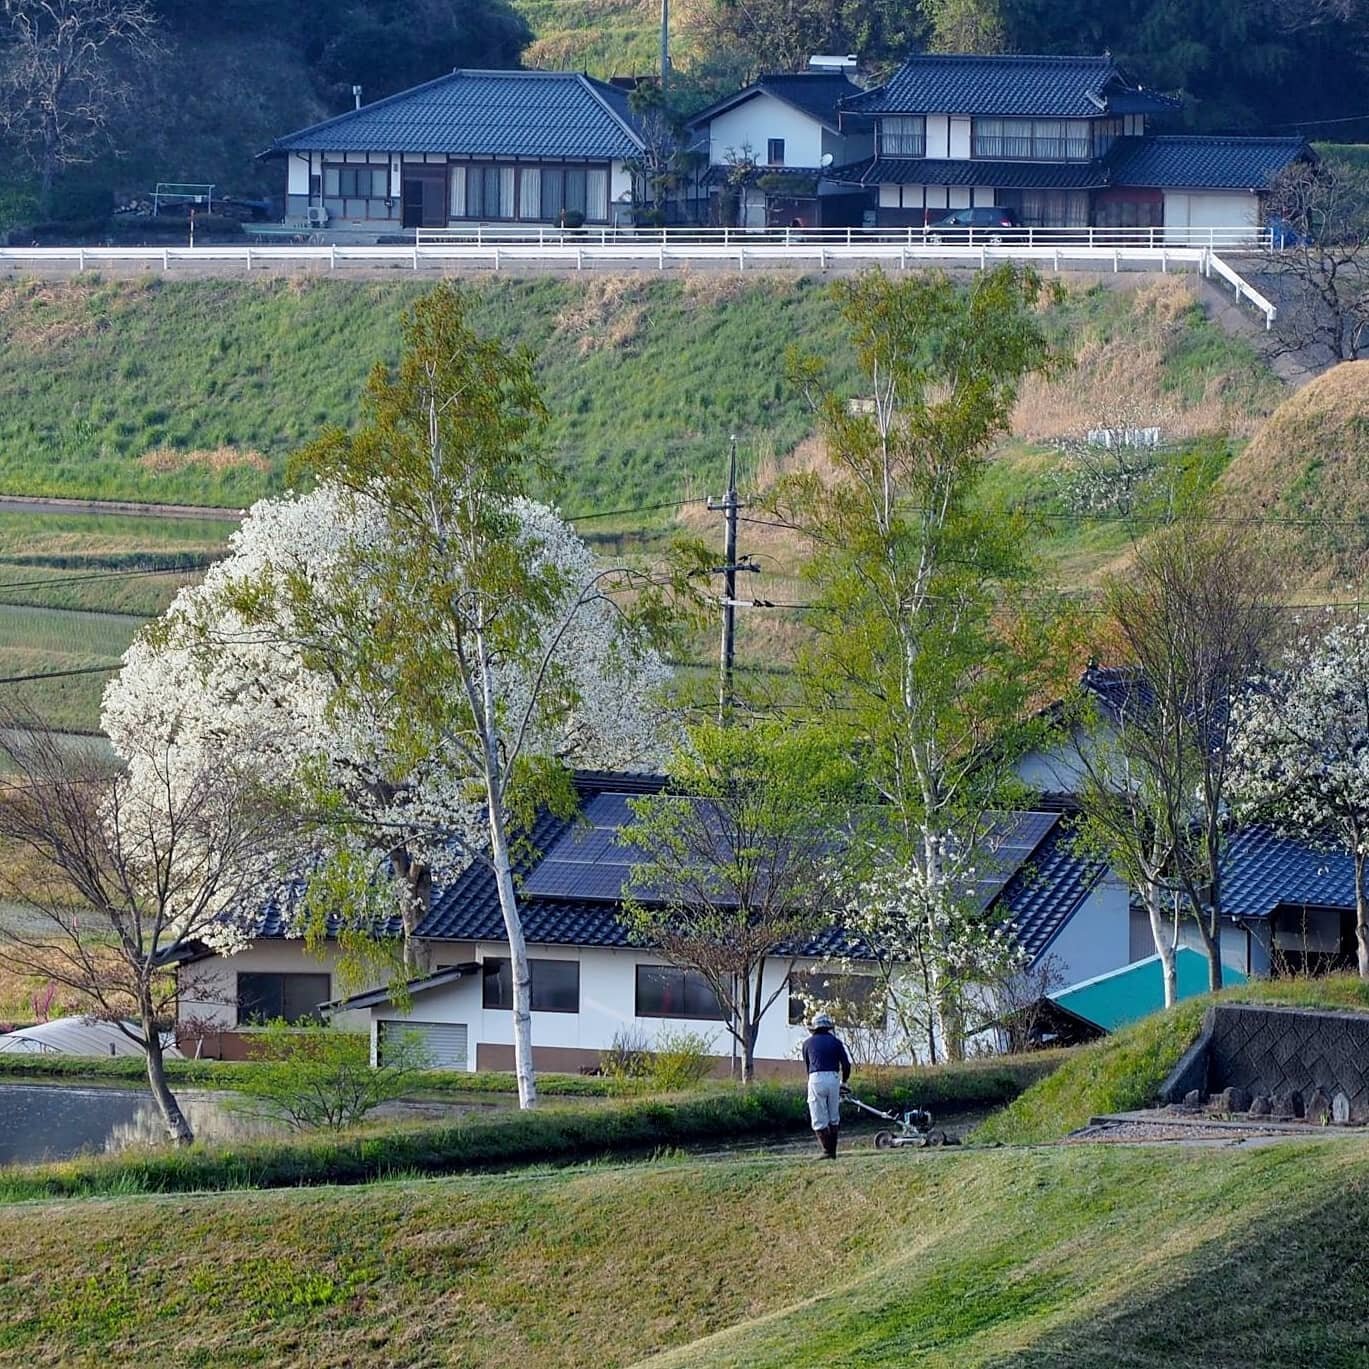 Stay in a restored farmhouse and experience the true Japanese countryside. ⁣
⁣
Located in Hiroshima Prefecture, Shobara is a rural village said to be the burial place of Goddess Izanami. In this small, friendly farming community you can choose from t